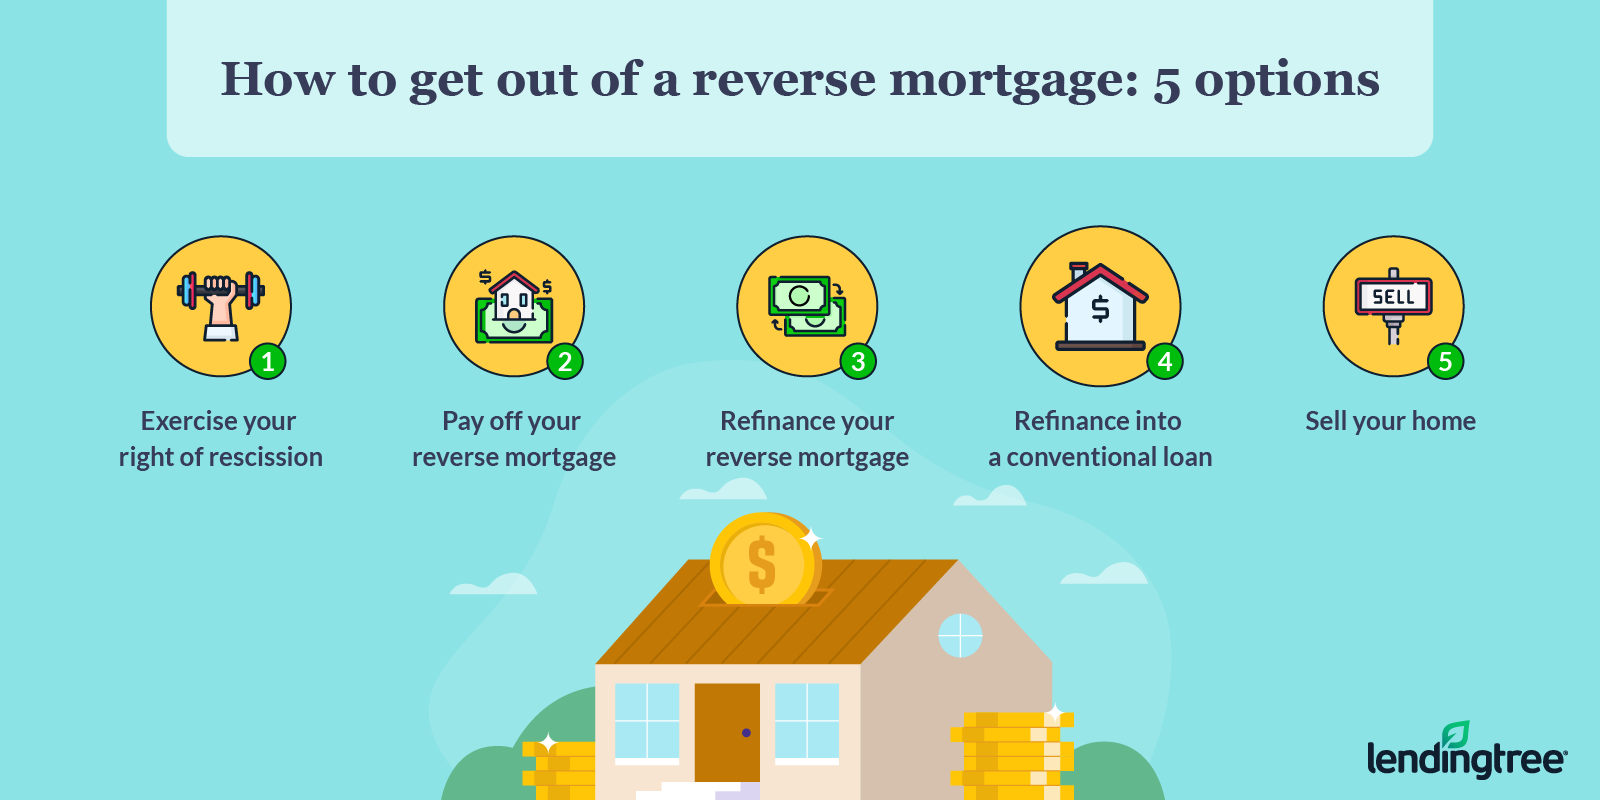 Easy and Direct Guide on getting Reverse Mortgage